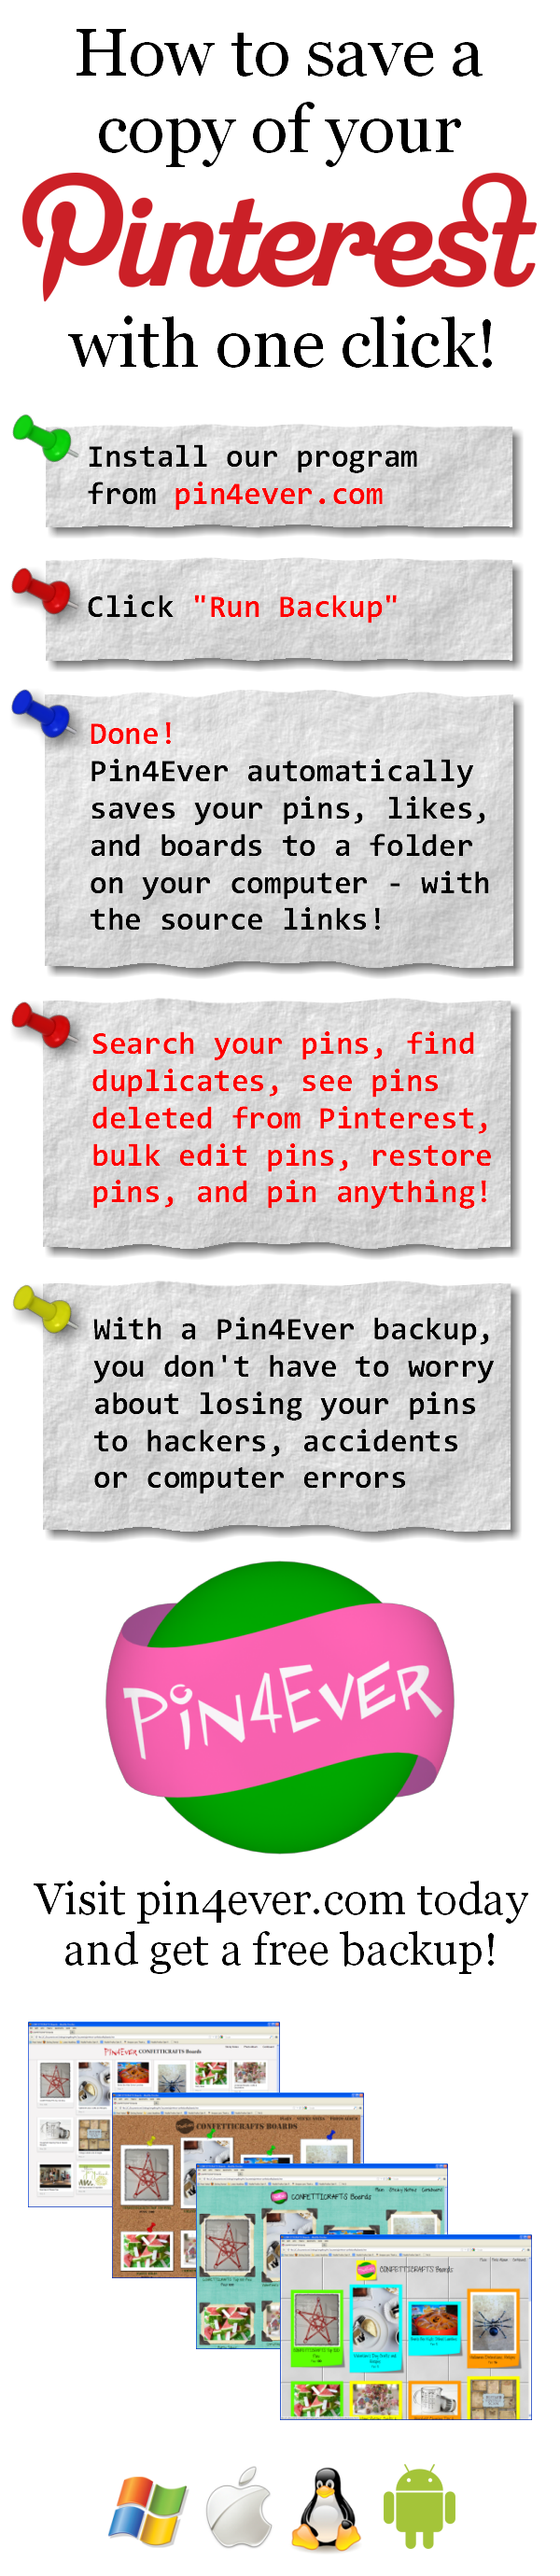 Are your pins protected? Pin4Ever has saved, edited or uploaded 476,662,196 pins since September 2012. Go to pin4ever.com and try it free!